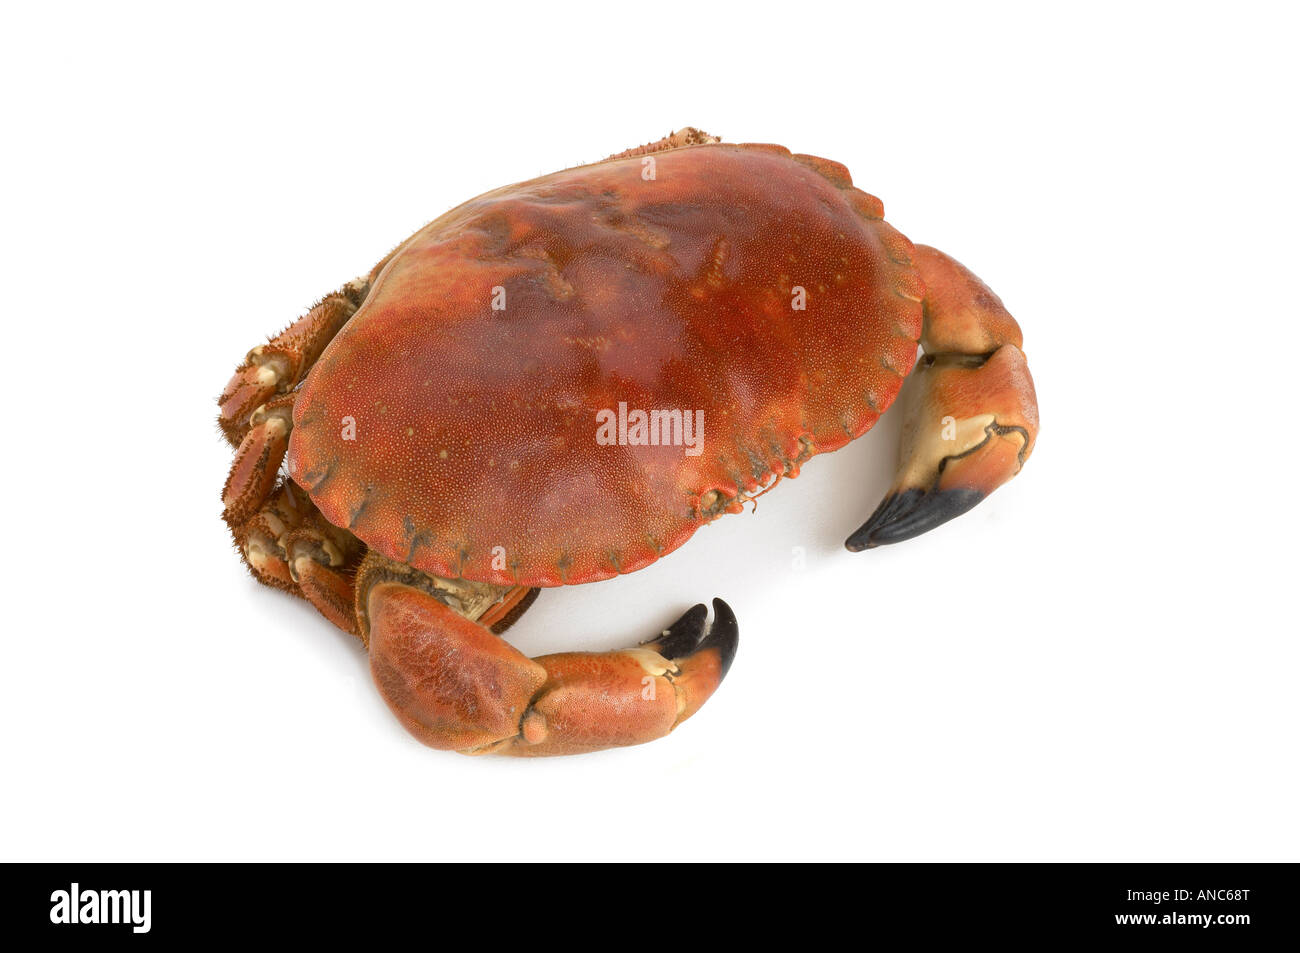 Whole Cooked Crab Stock Photo